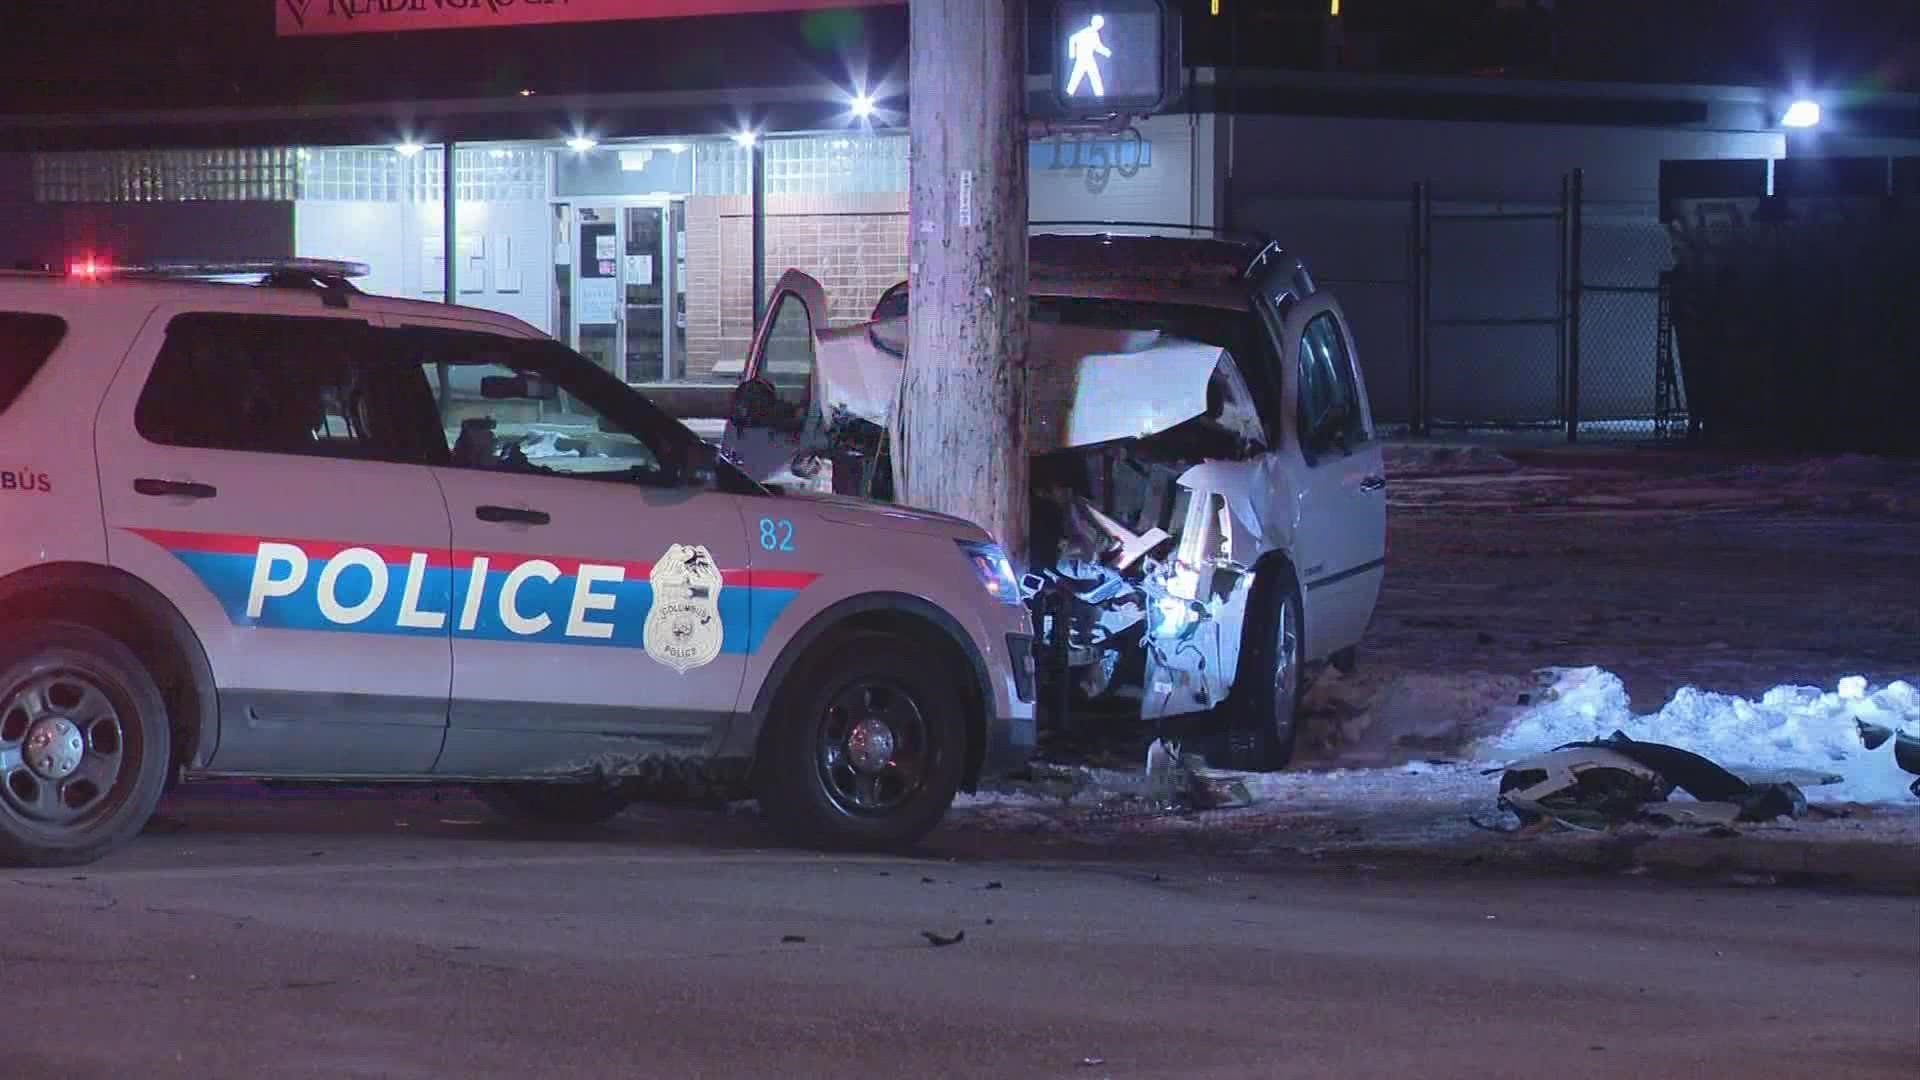 One person is dead after crashing into a pole with his vehicle in Columbus early Wednesday morning.